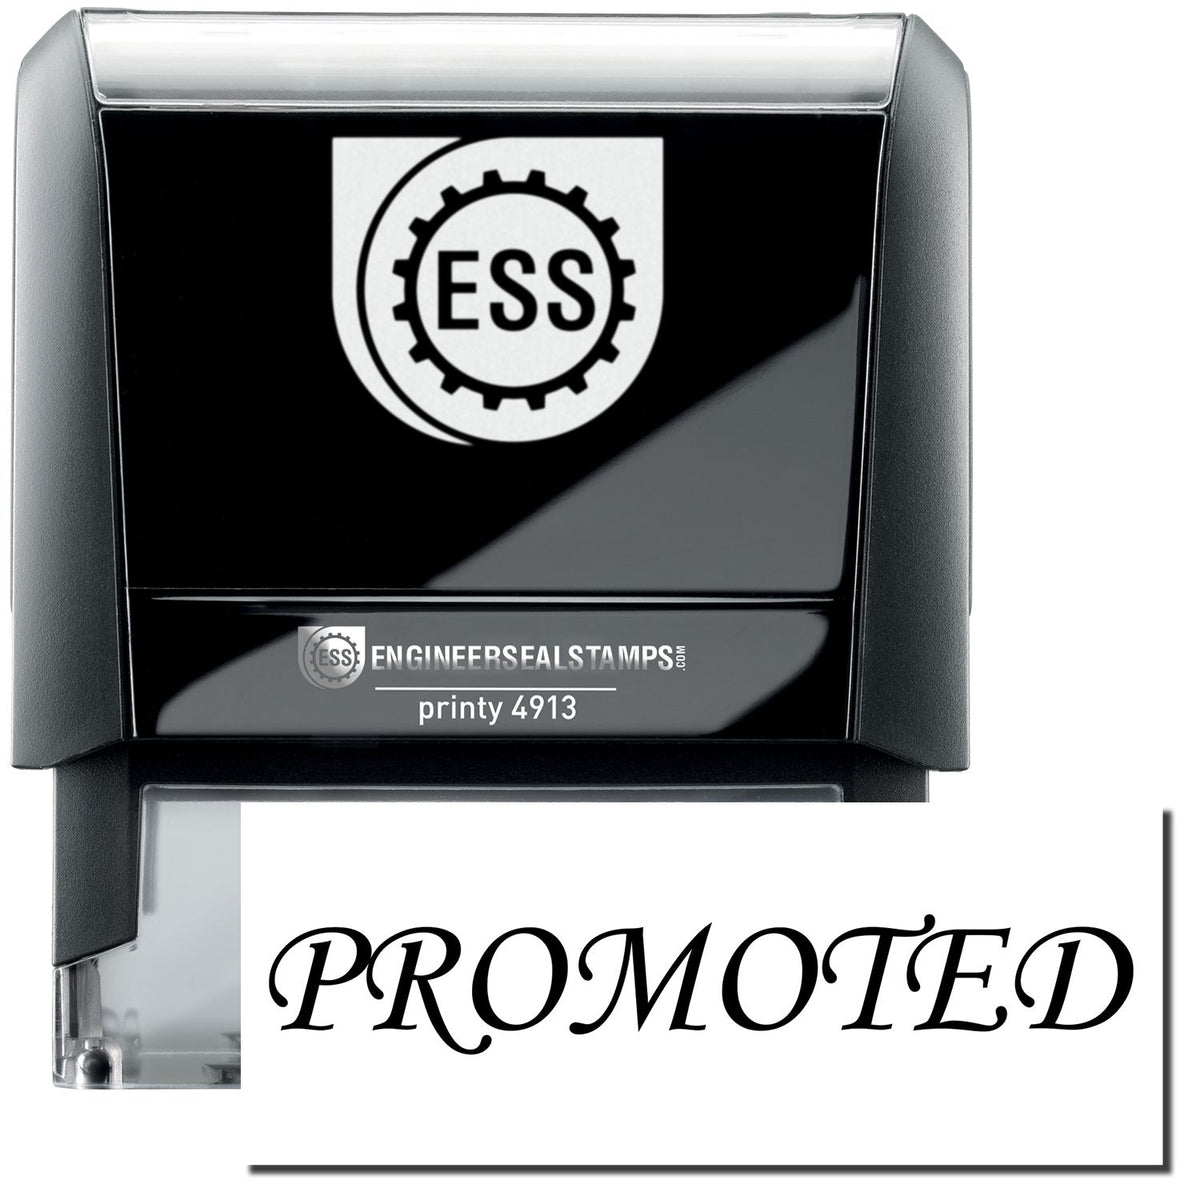 A self-inking stamp with a stamped image showing how the text &quot;PROMOTED&quot; in a large bold font is displayed by it.